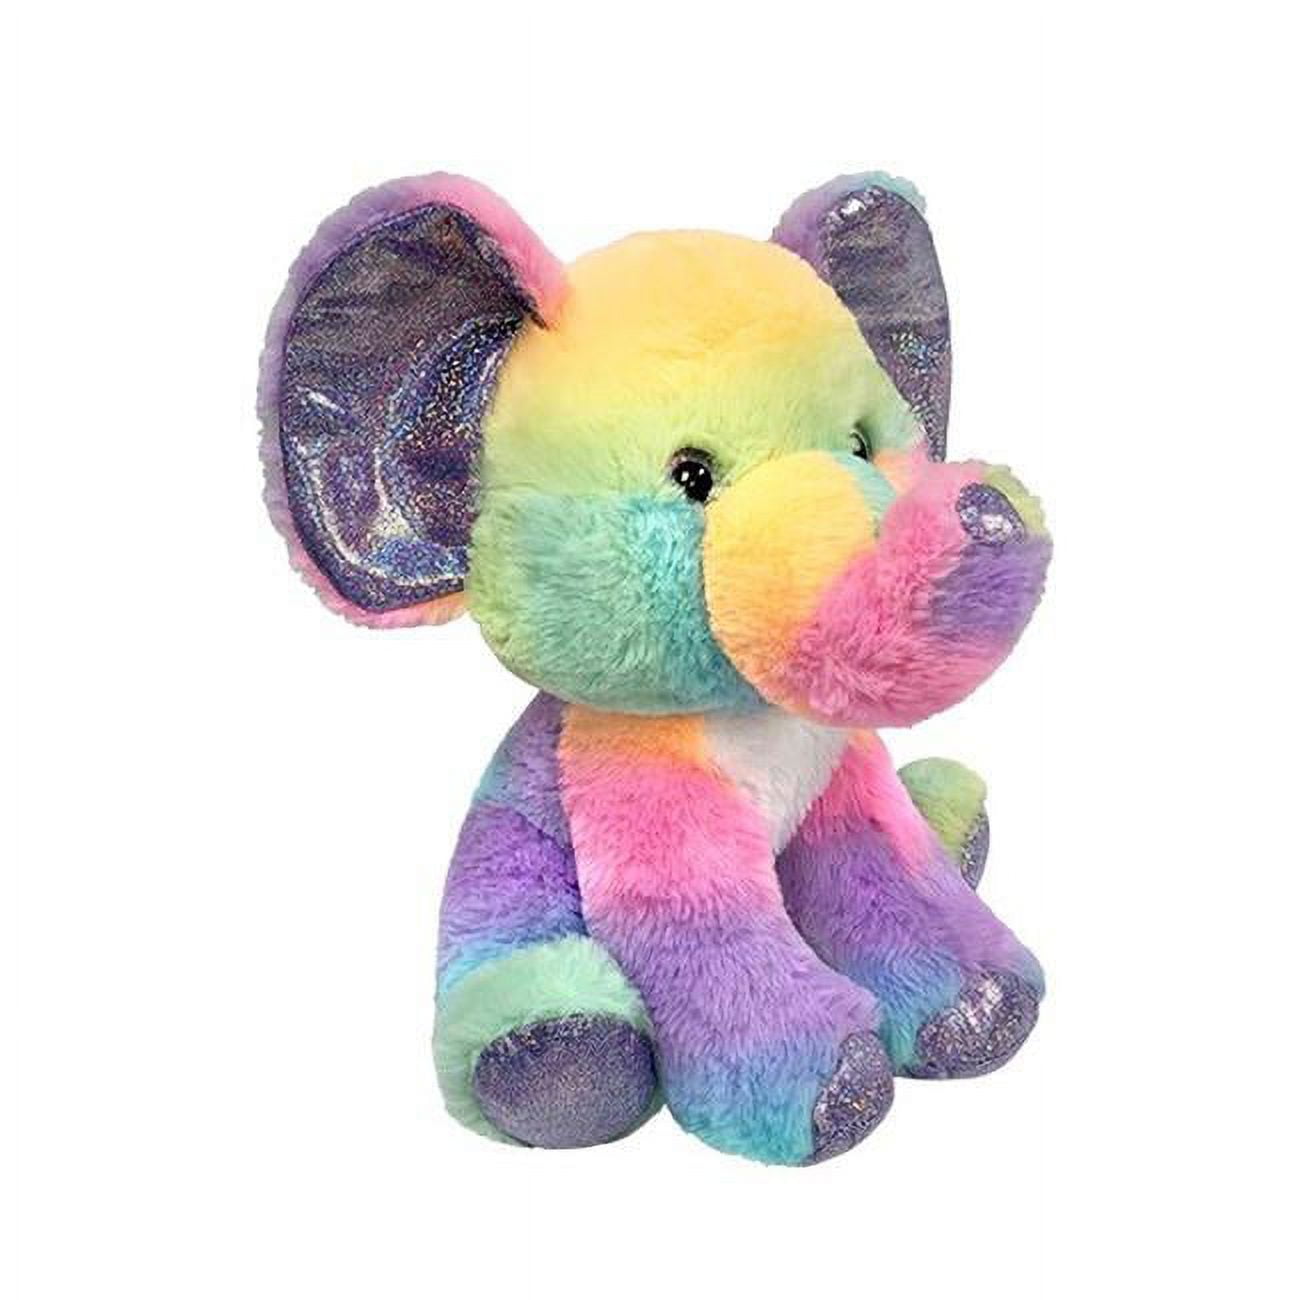 Picture of DDI 2348129 10 in. Sitting Elephant Plush - Rainbow Sherbert - Case of 24